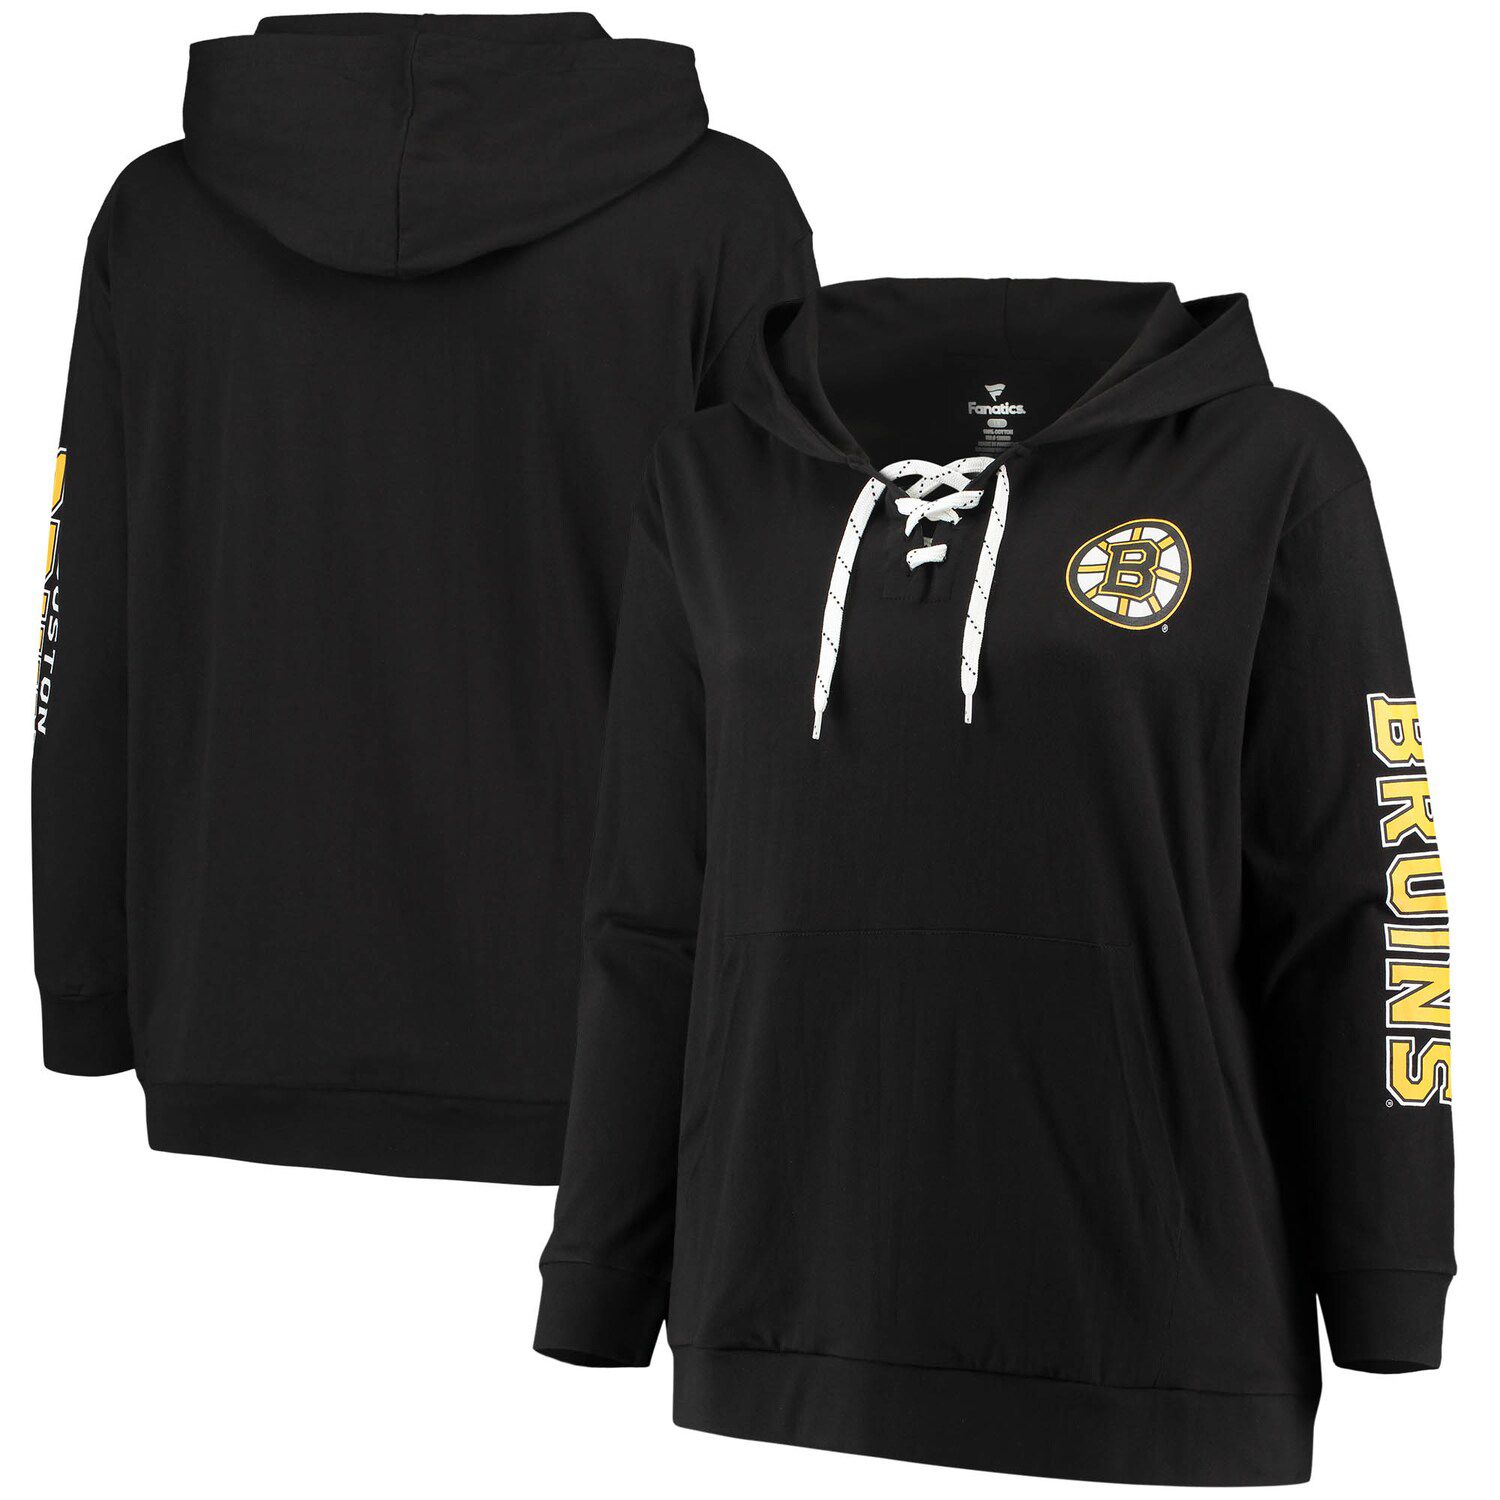 plus size pullover hoodie